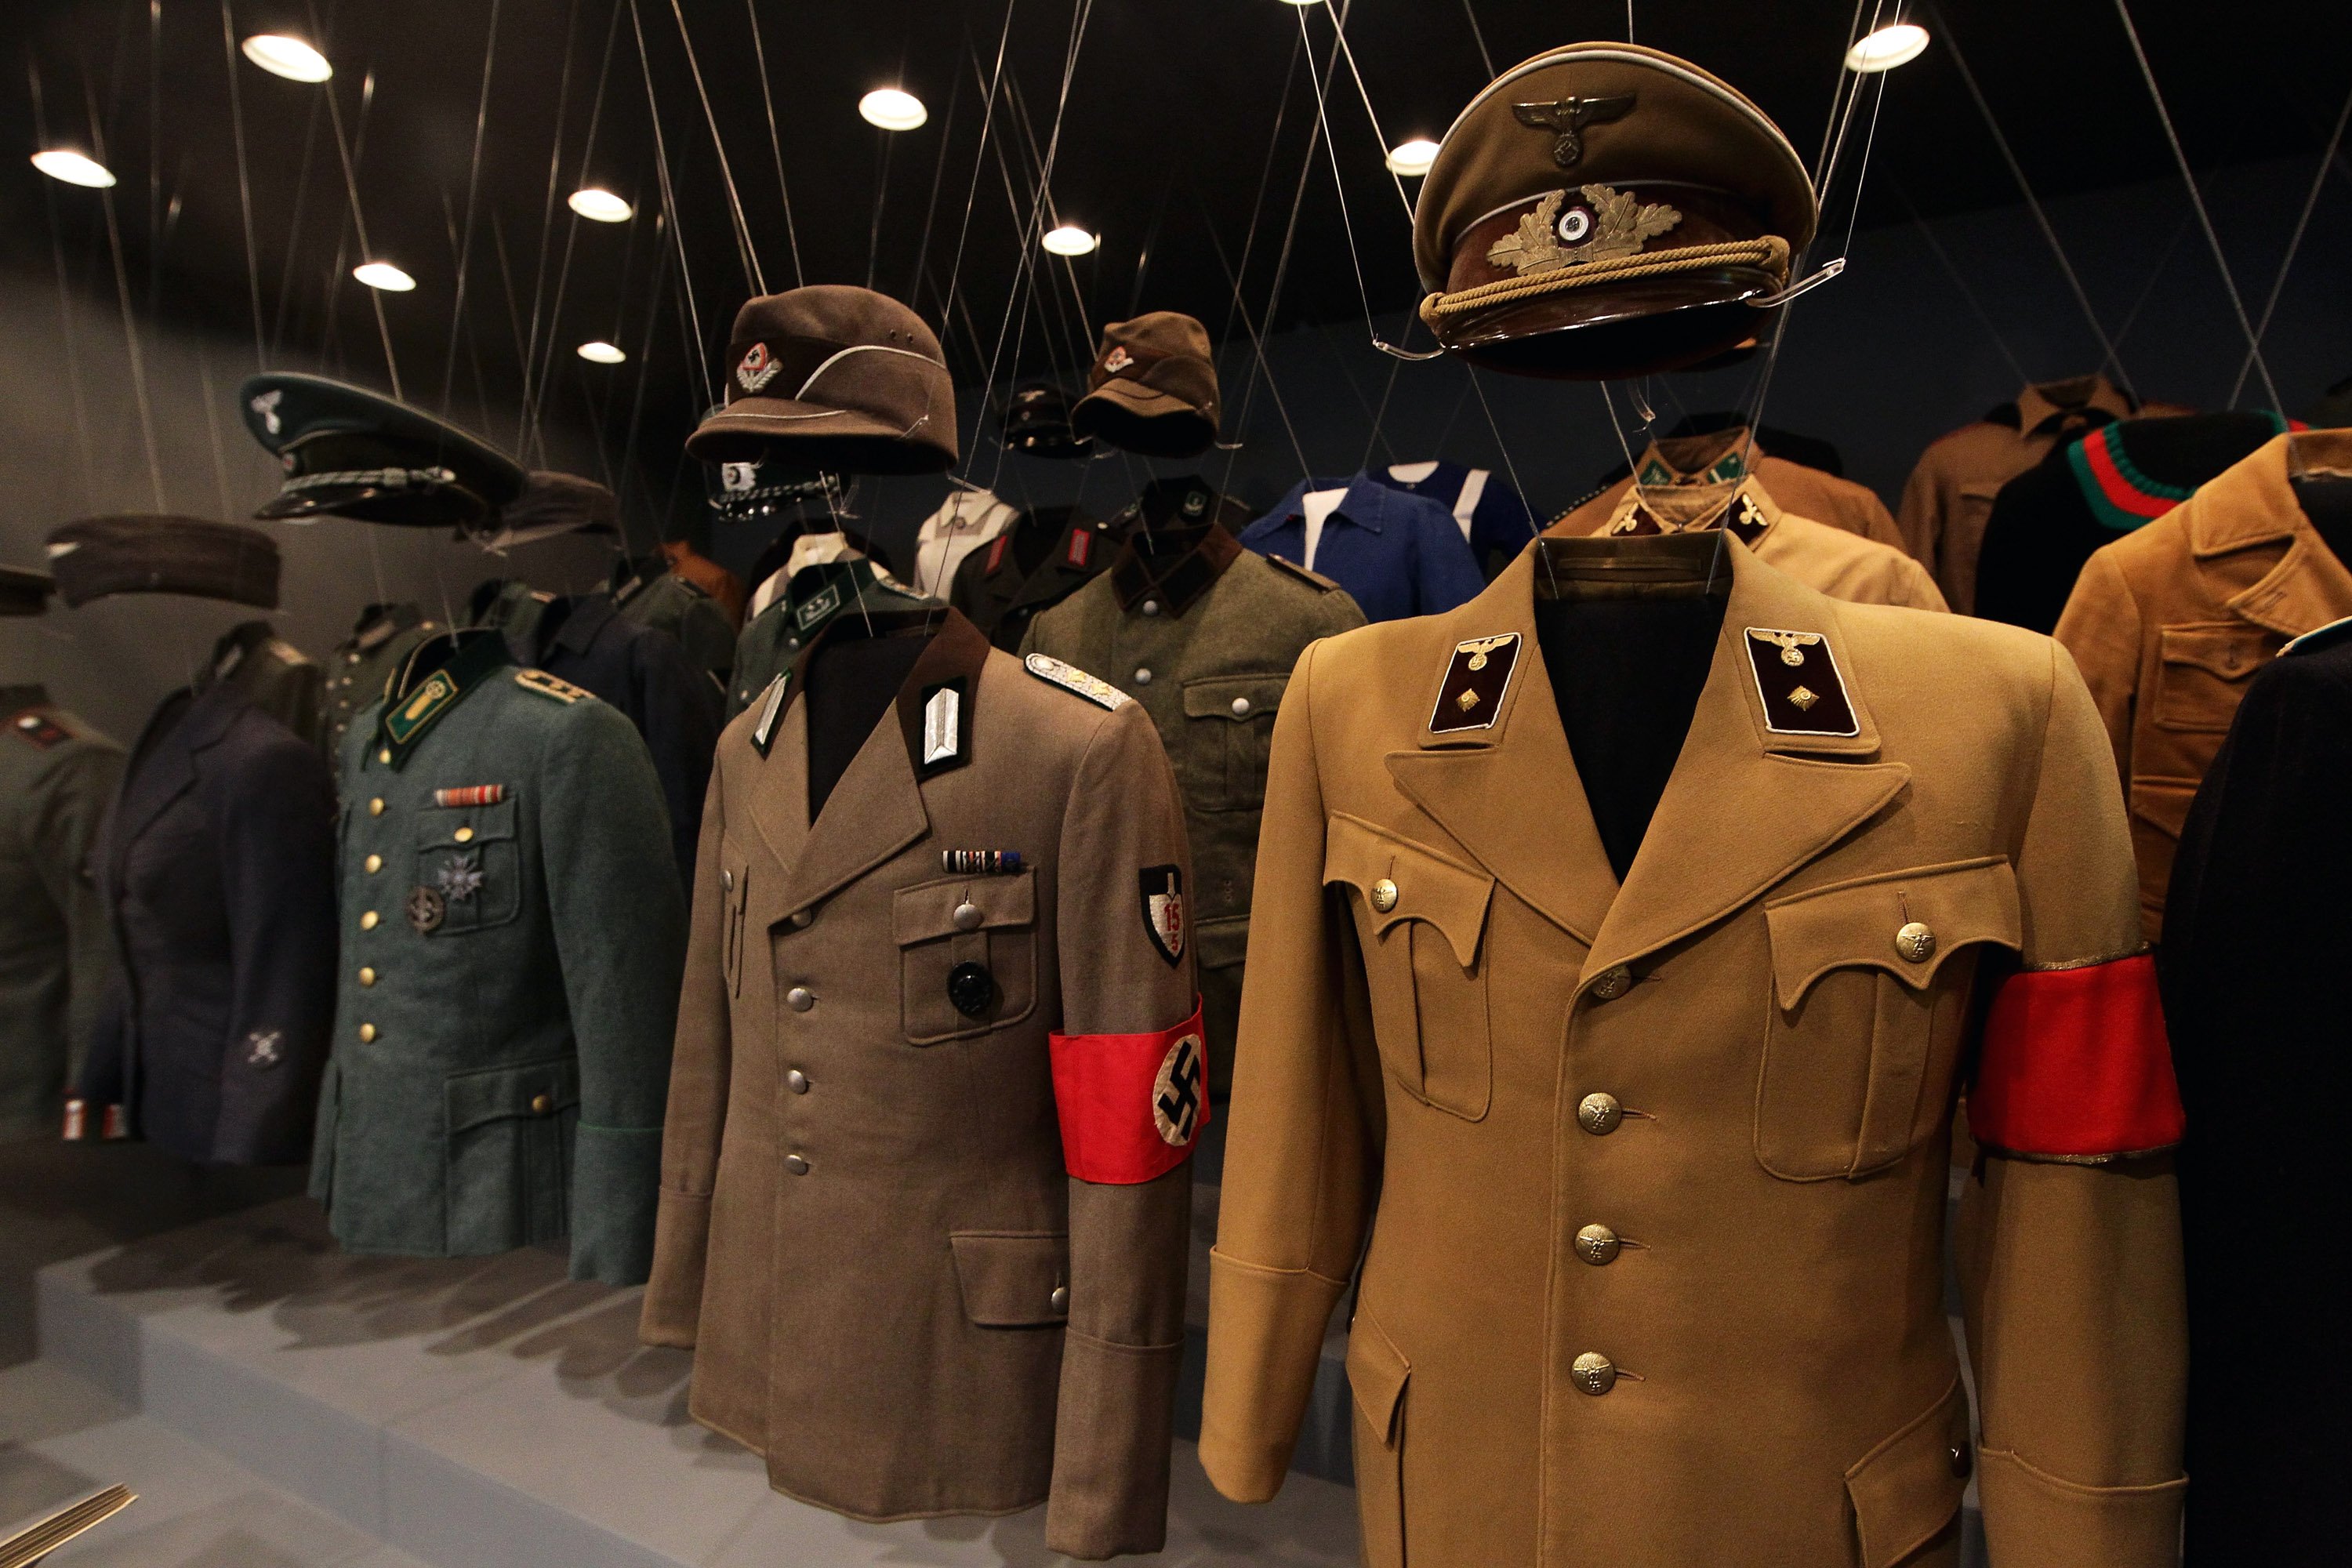 Thieves Swipe Nazi Uniforms From a Danish Museum, the Latest in a